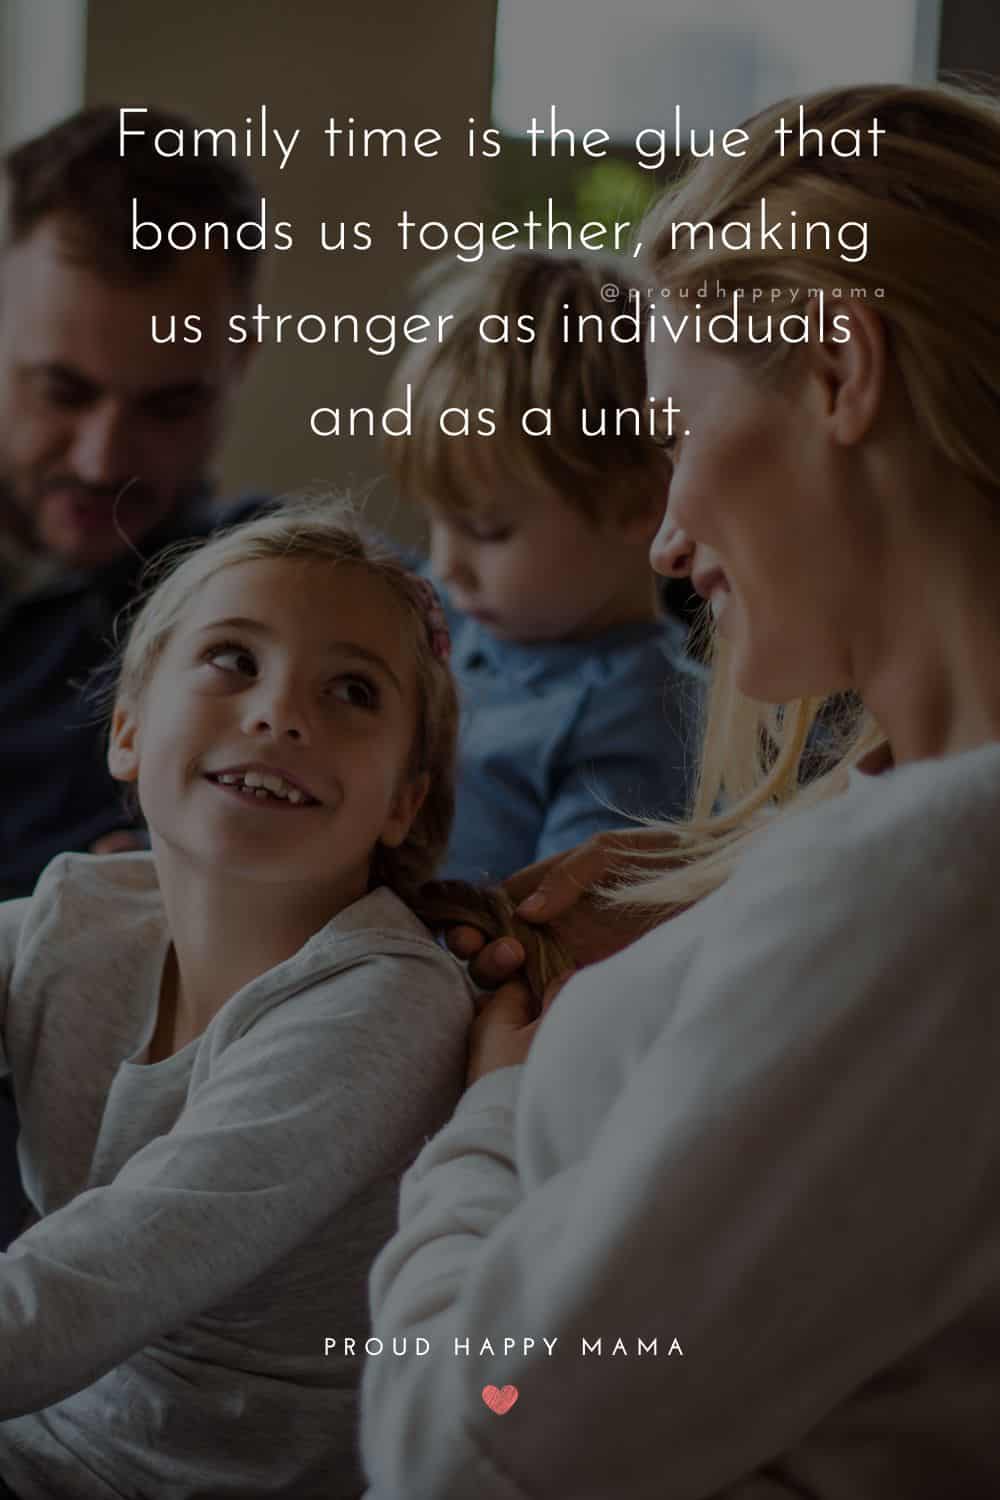 time with family quotes - Family time is the glue that bonds us together, making us stronger as individuals and as a unit.